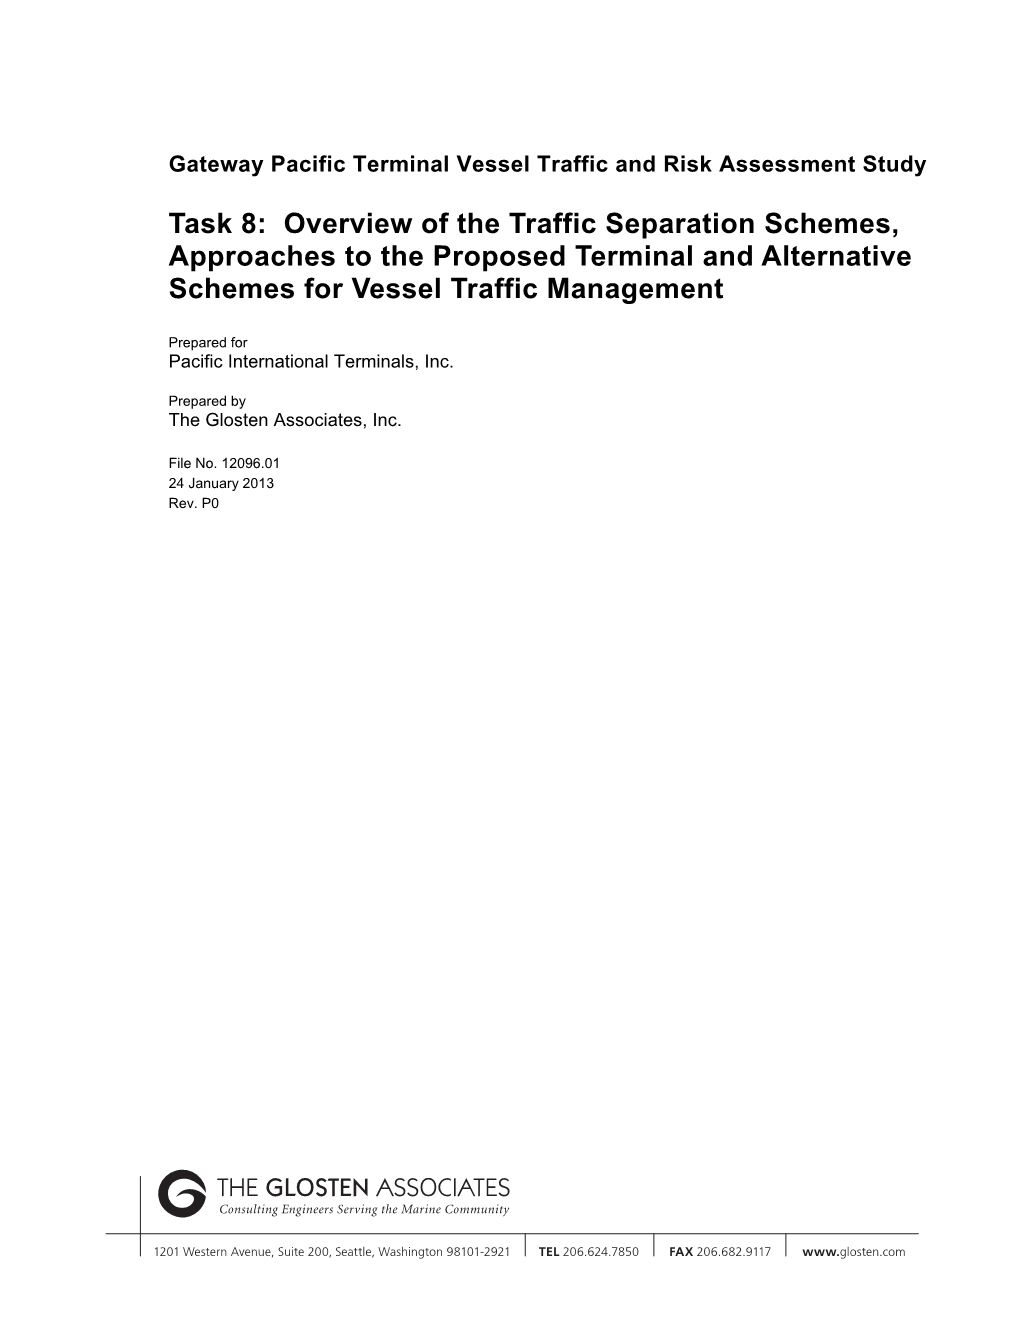 Task 8: Overview of the Traffic Separation Schemes, Approaches to the Proposed Terminal and Alternative Schemes for Vessel Traffic Management